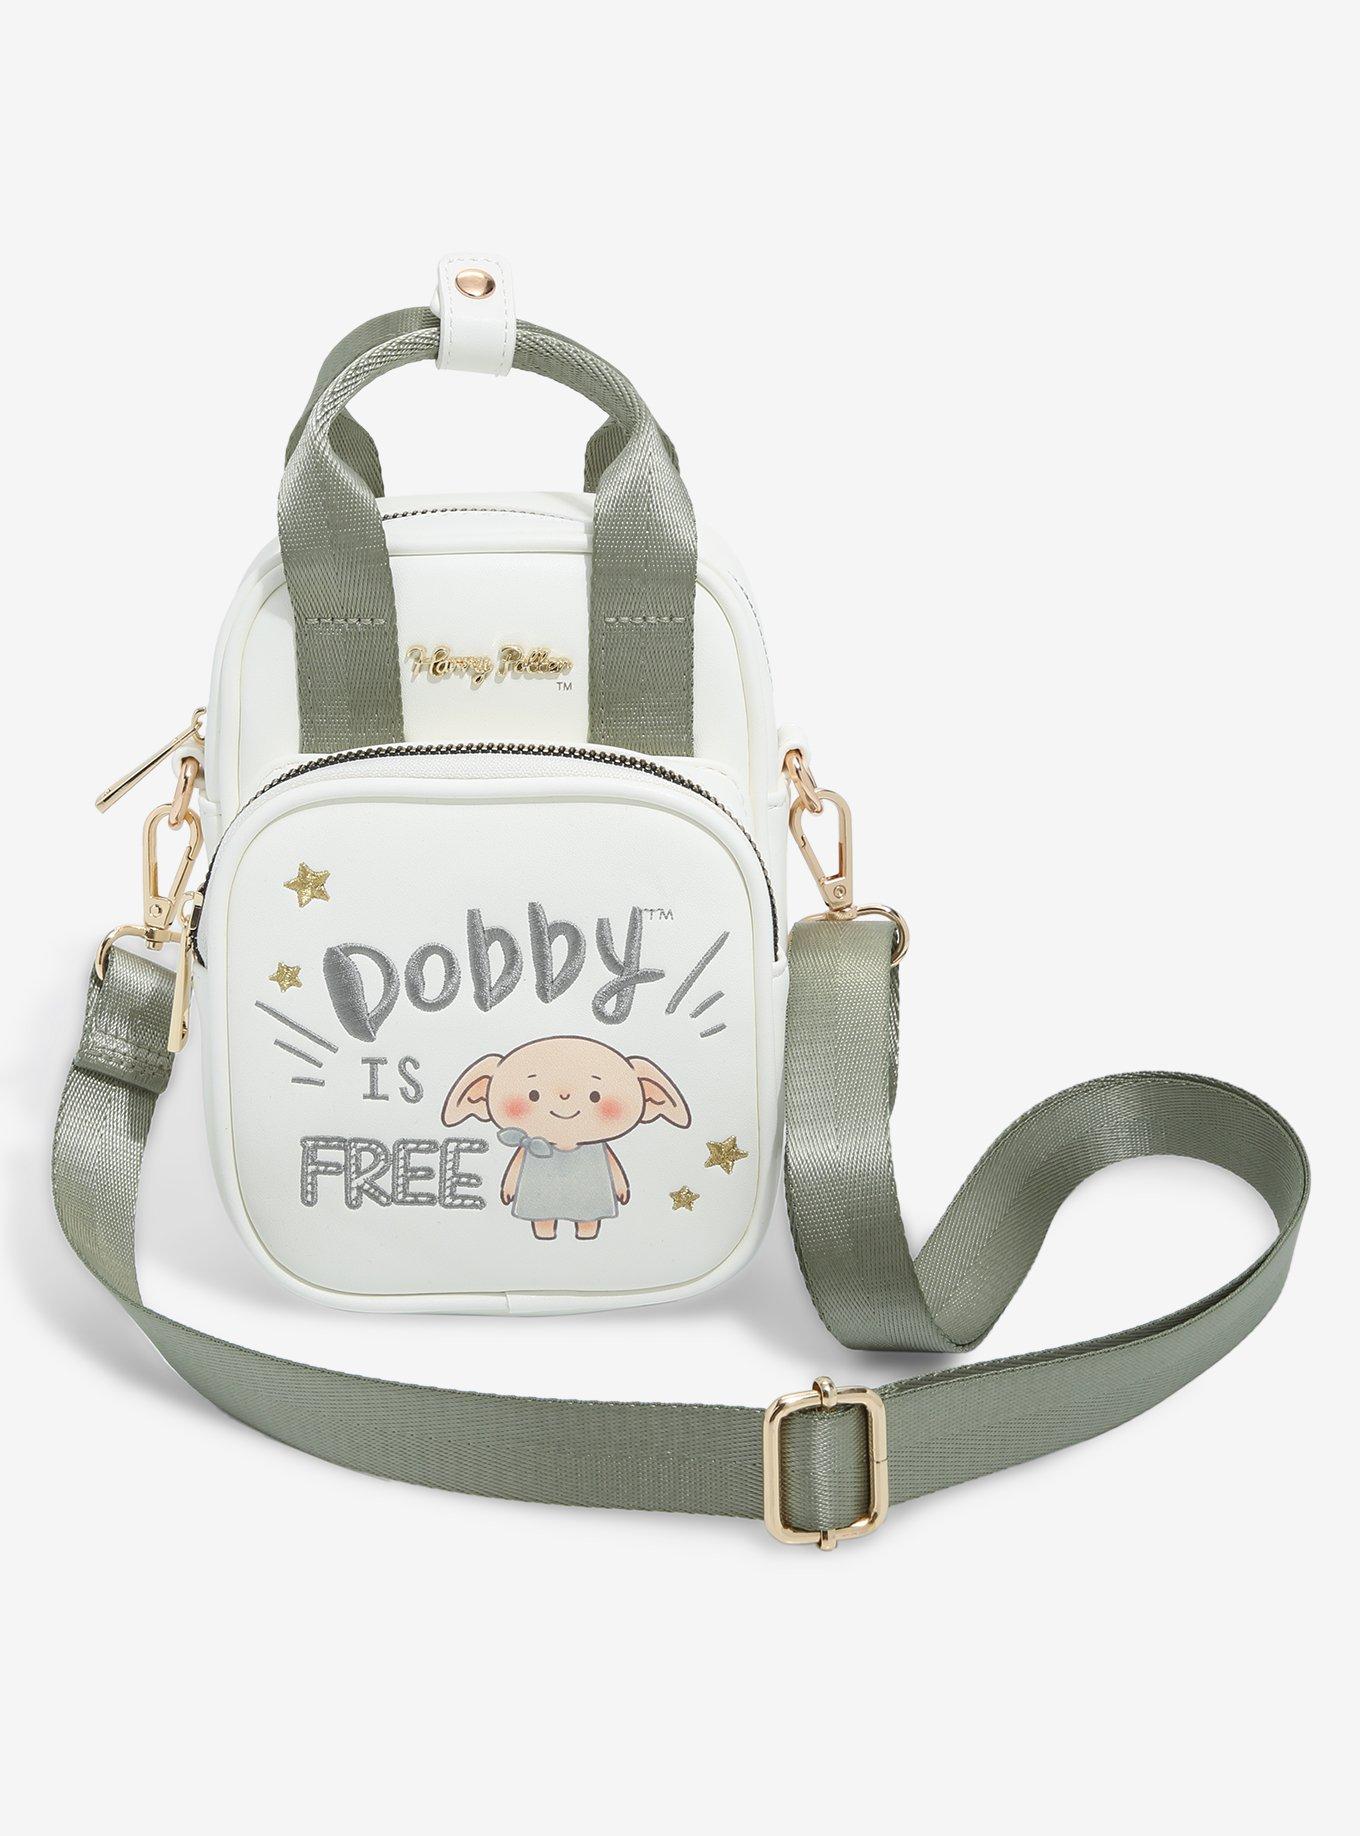 Harry Potter Chibi Dobby is Free Crossbody Bag - BoxLunch Exclusive |  BoxLunch